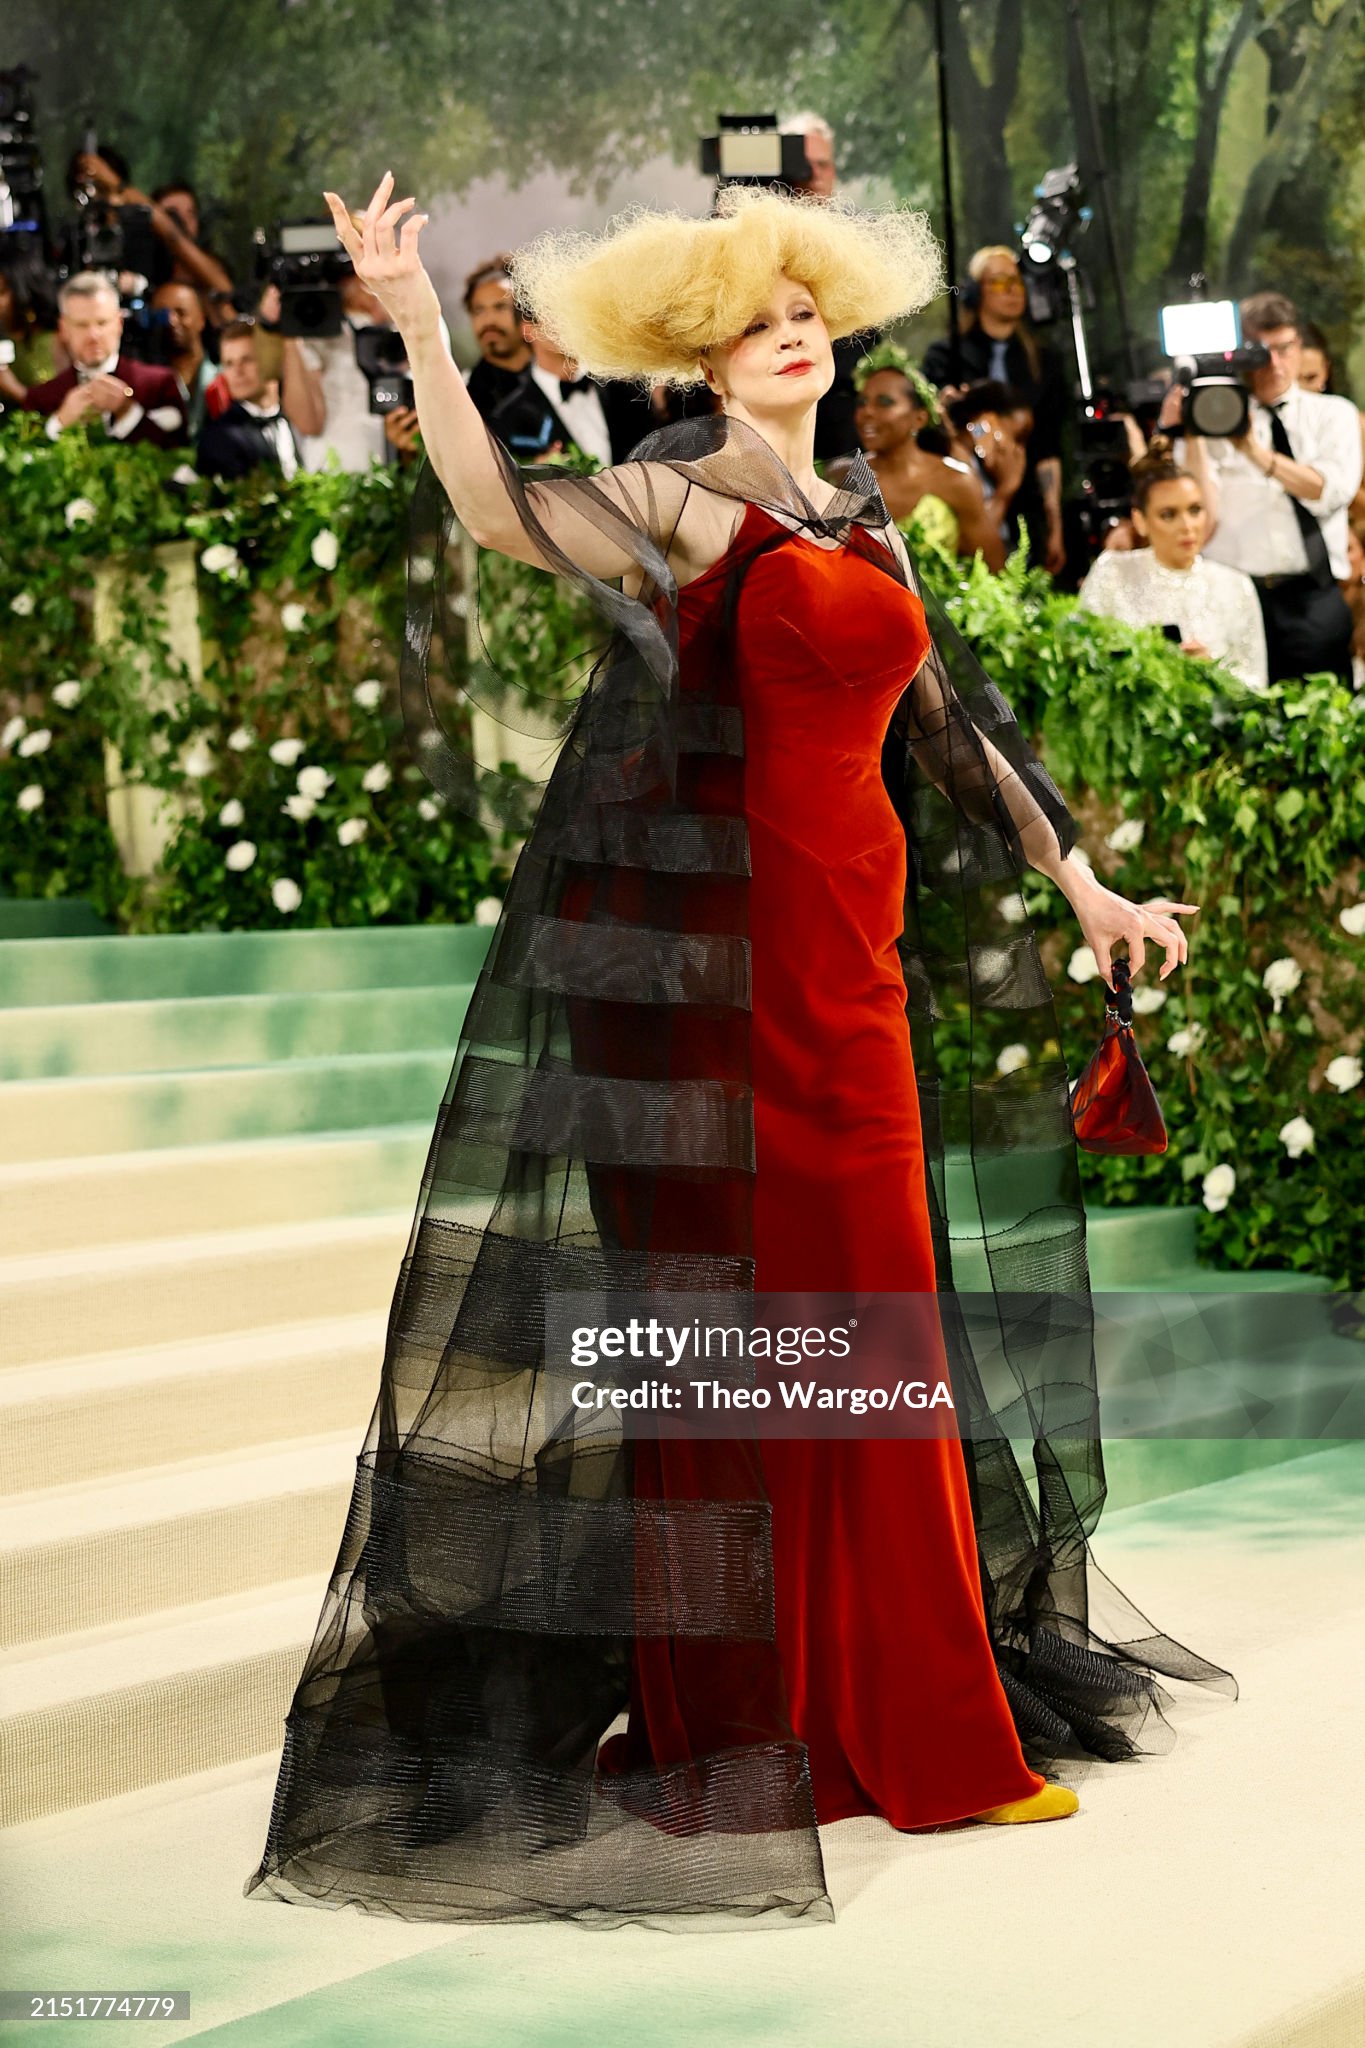 gettyimages-2151774779-2048x2048.jpg